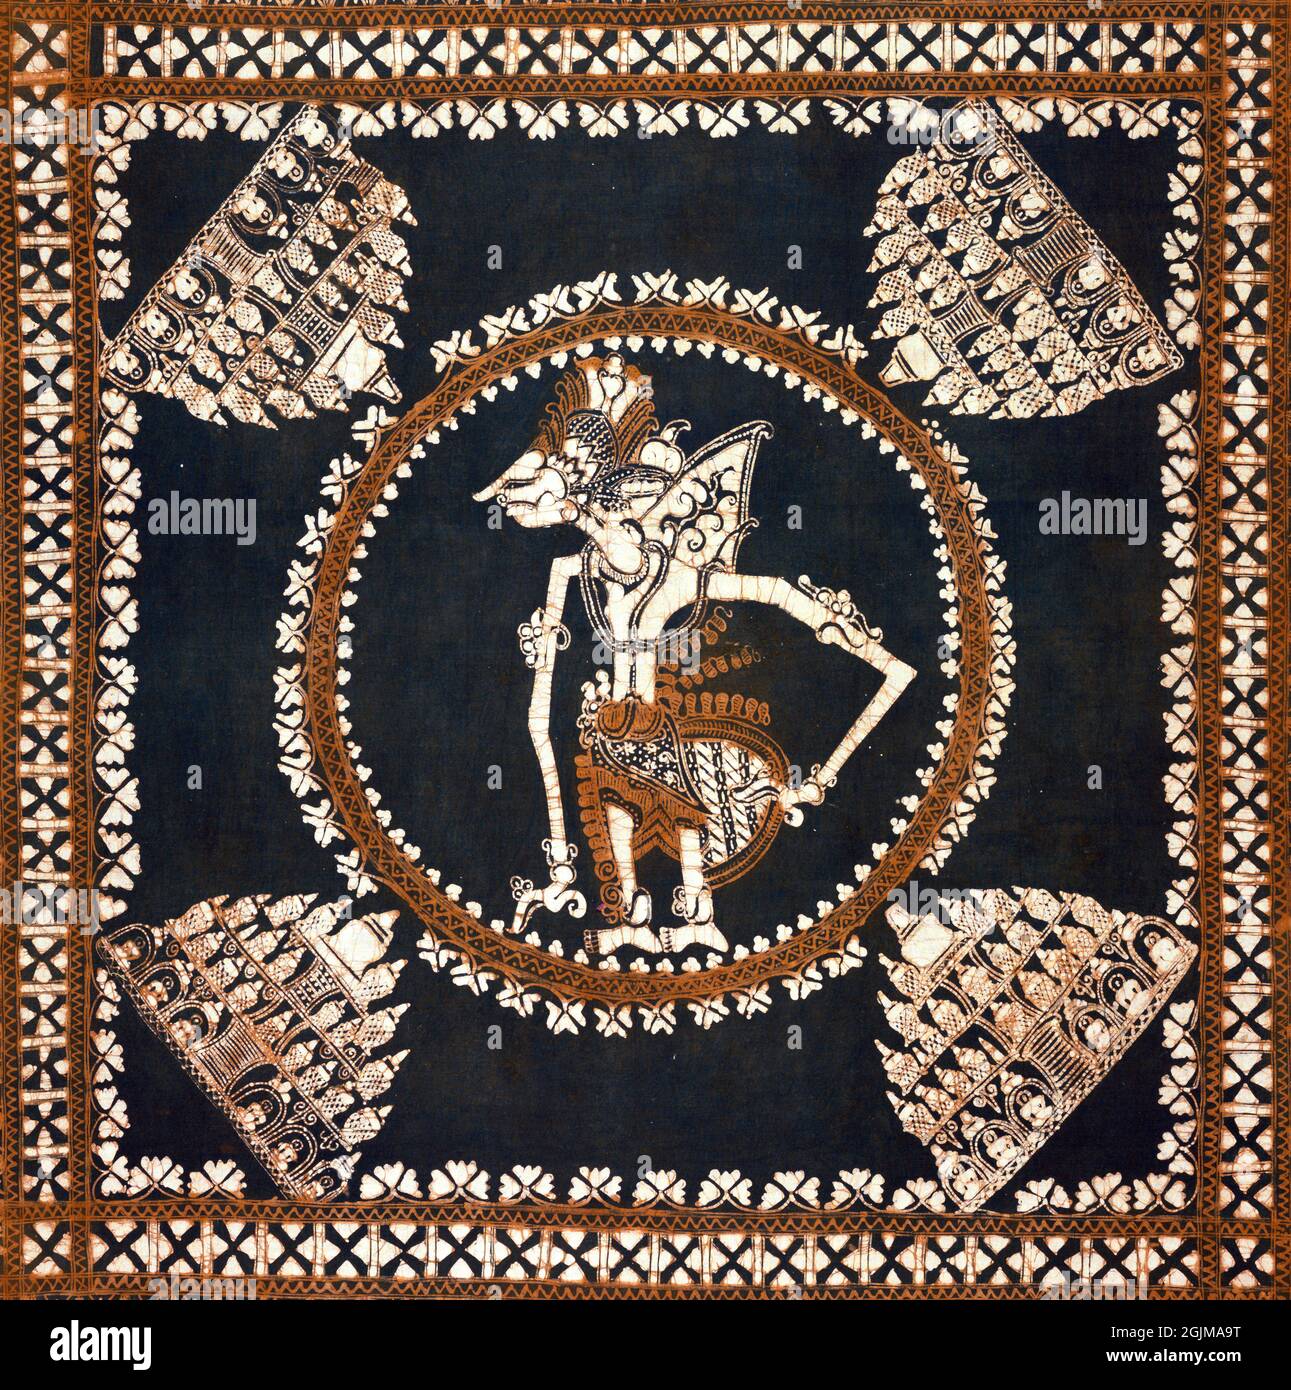 A batik tie-dyed square of cotton fabric depicting a puppet (wayang) figure acting out an  heroic poem of the Mahabharata. Possibly a head cloth (kain kepala).  All four corners ornamented with a stupa motif, not unlike Borobudur. Java, Indonesia; possibly Yogyakarta. Possibly 19th century. Stock Photo